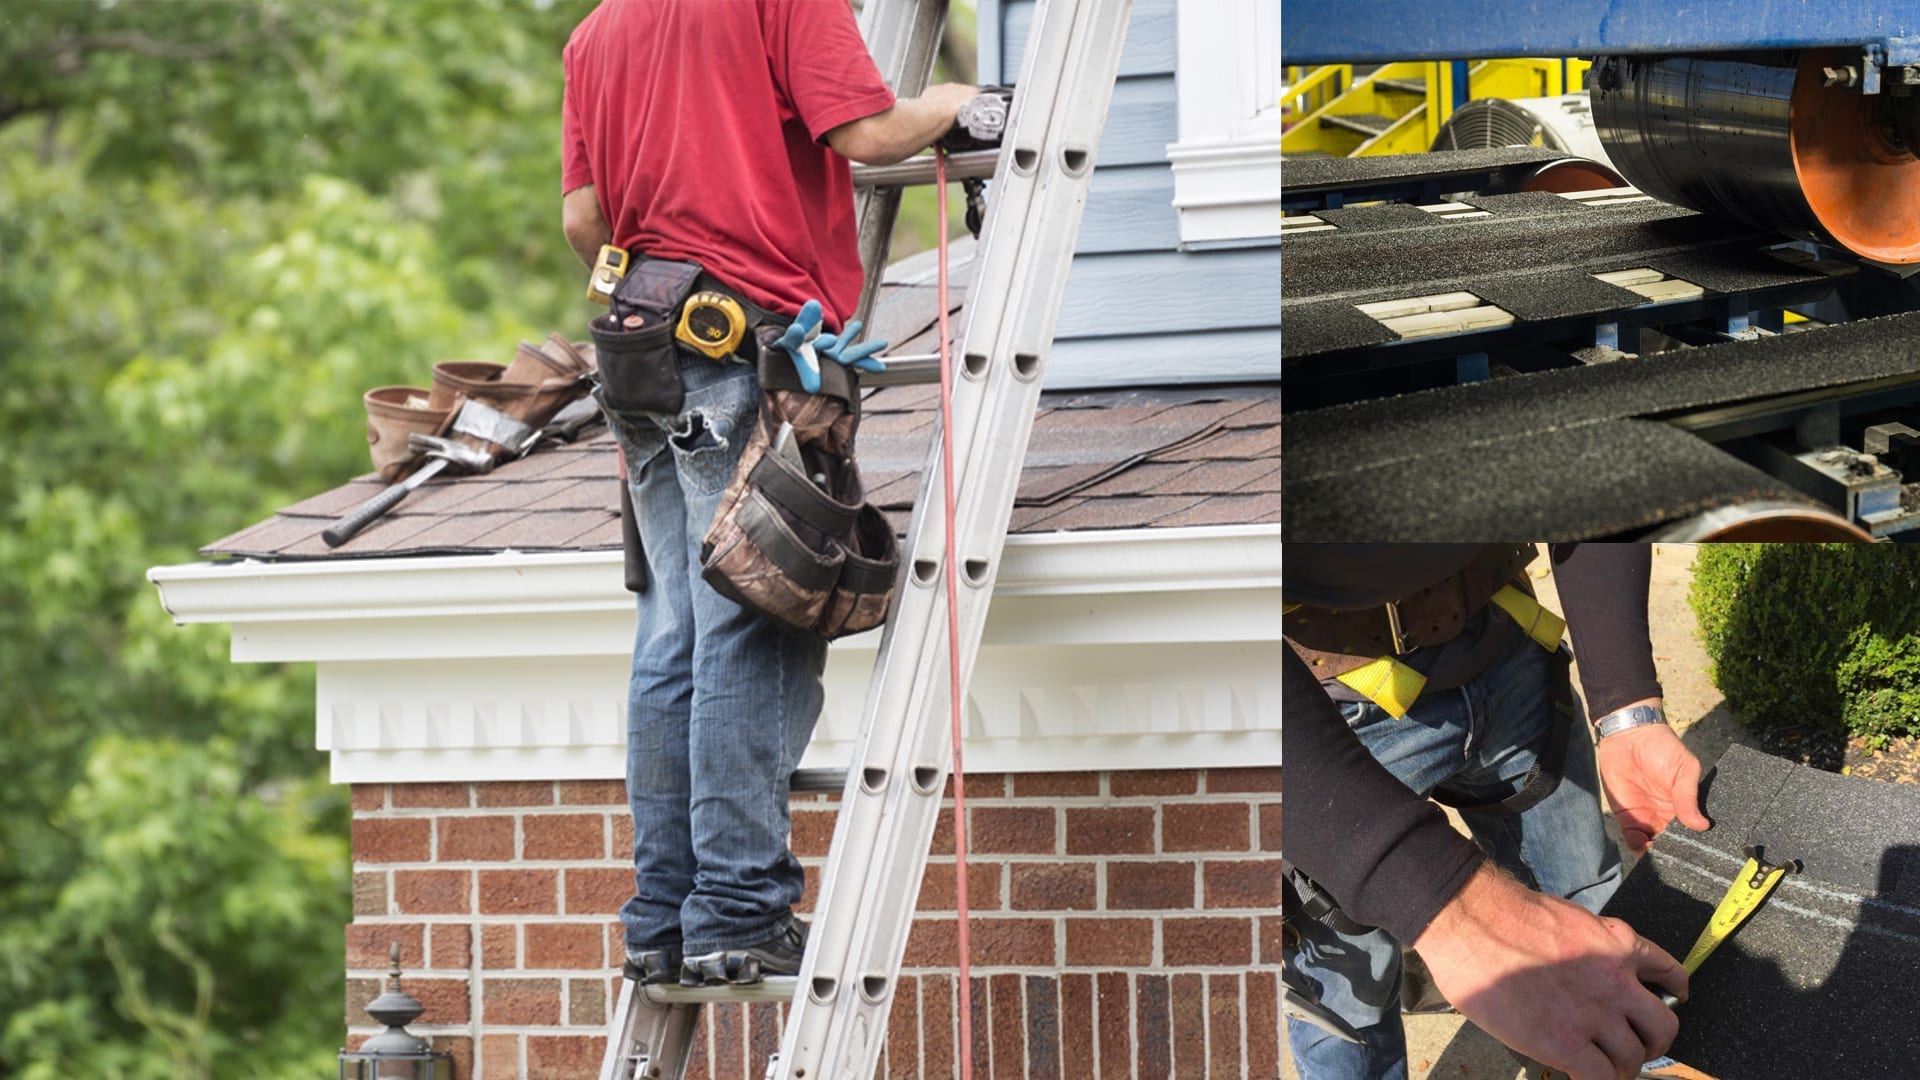 How to Choose the Right Roof Ladder for the Job